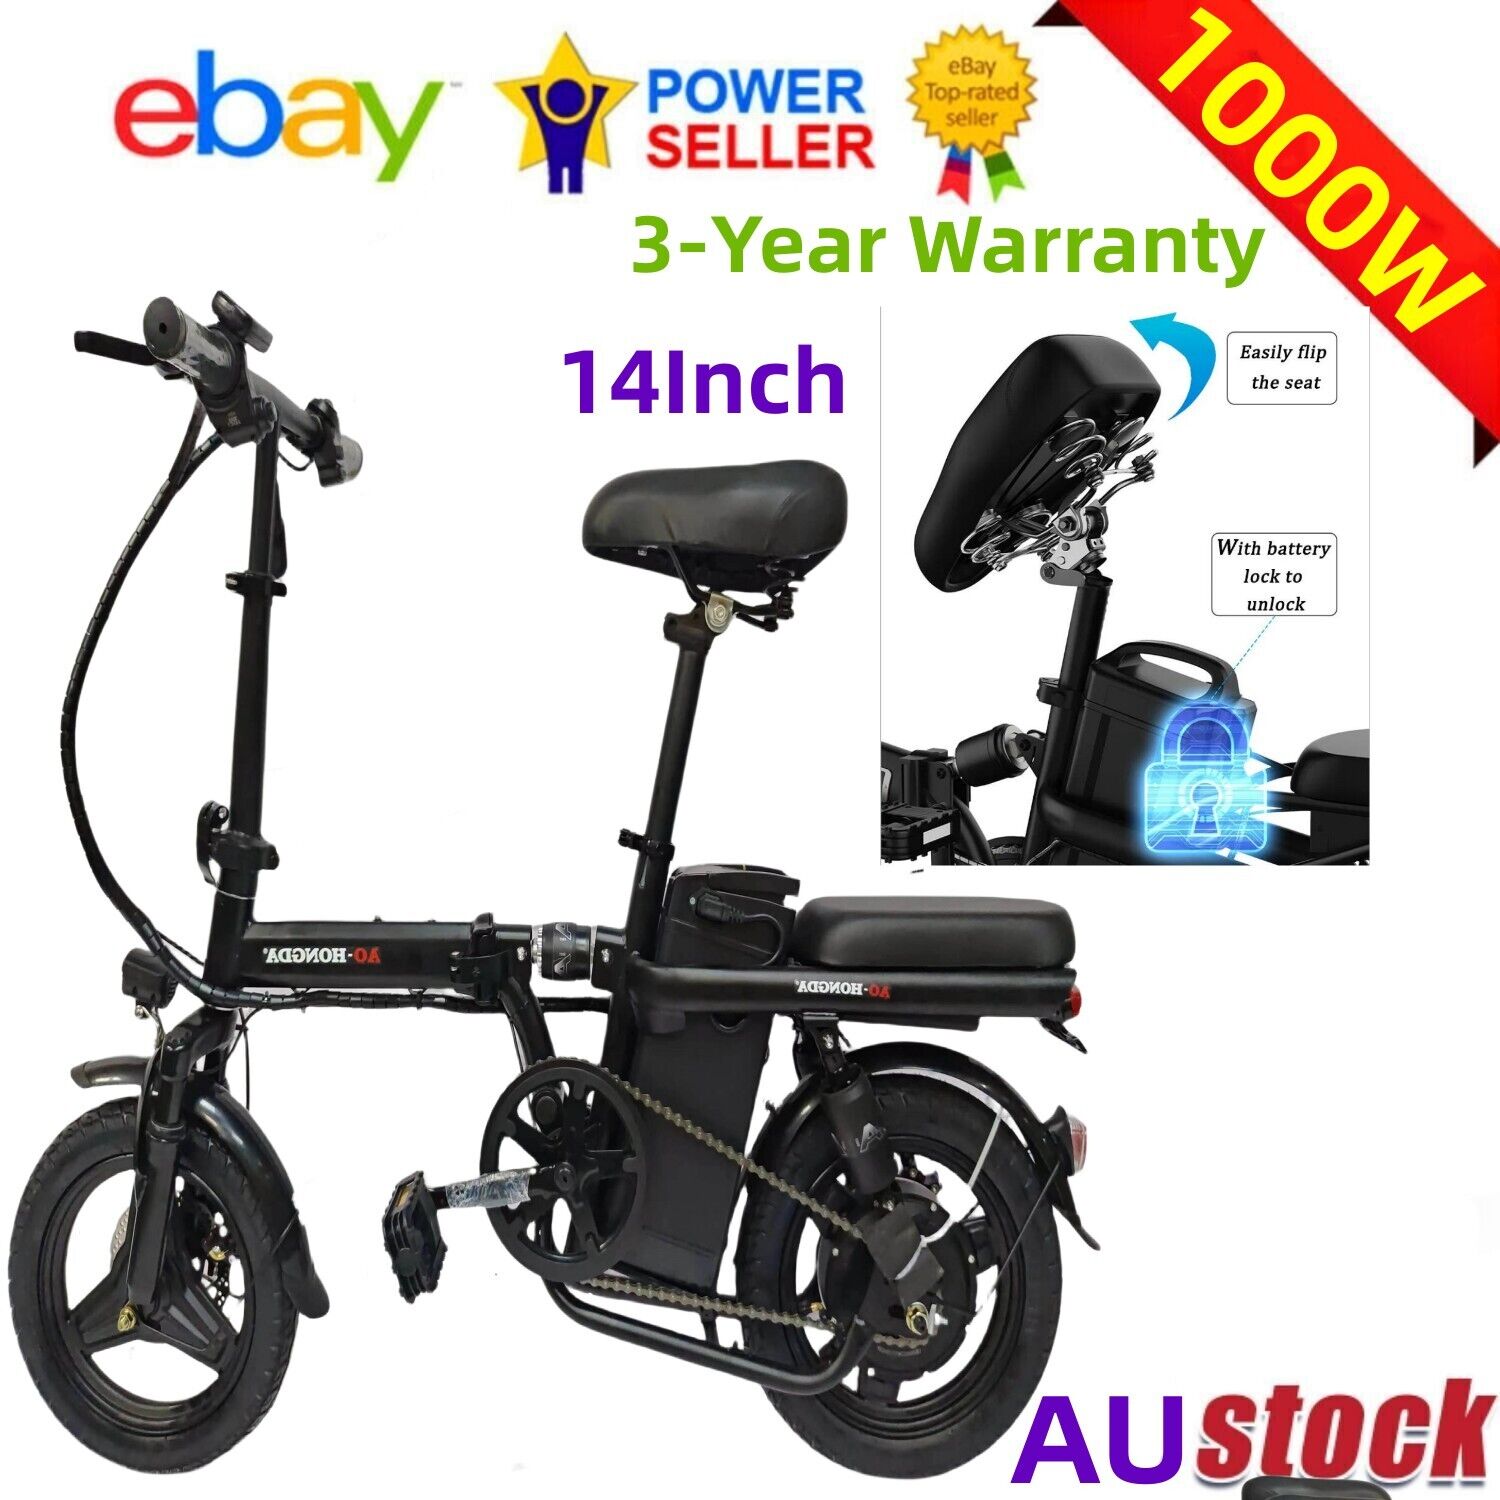 🚨1000W Motor Electric Bike Fold Bicycle Scooter 48V Removable Lithium Battery🚨